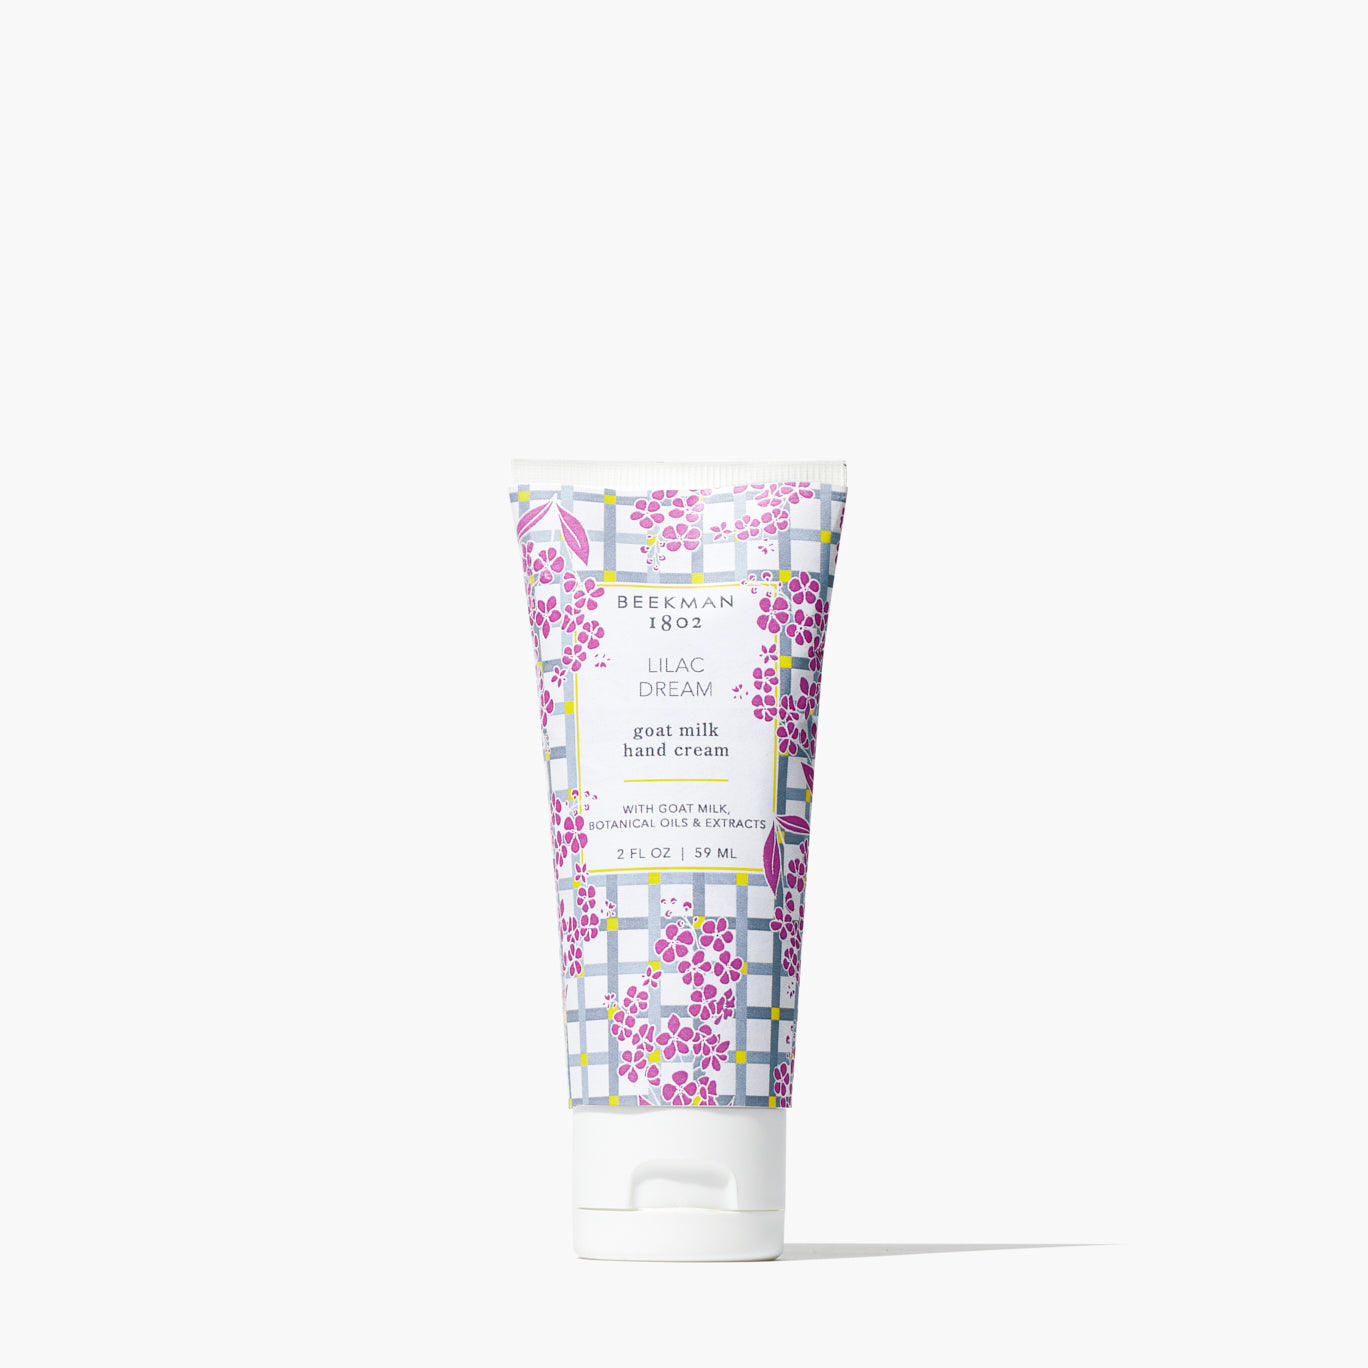 tube of lilac dream hand cream with a floral design printed on it.